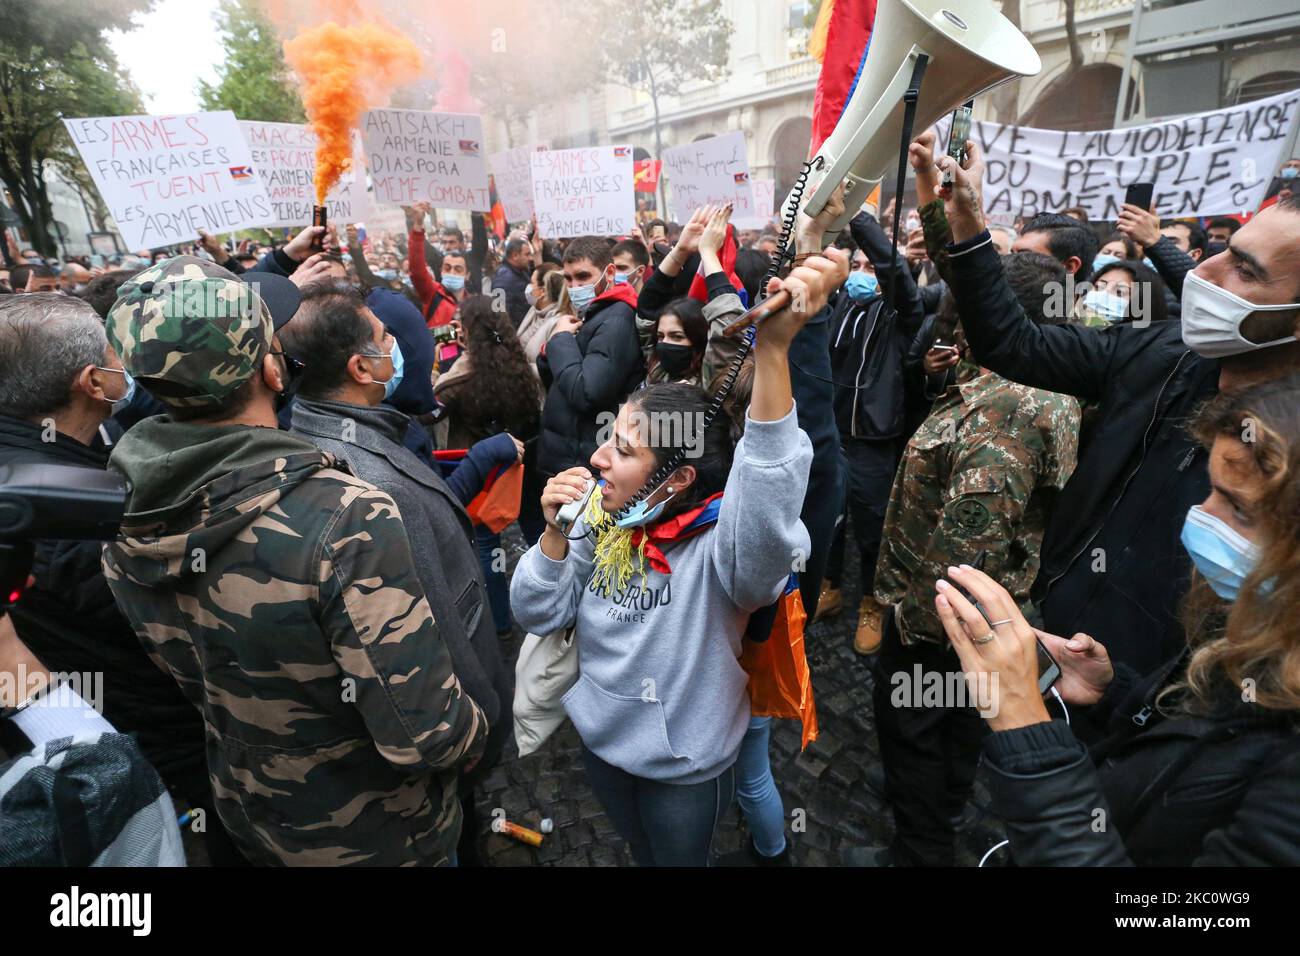 Armenians, carrying smoke bombs and flags in the colors of Armenia take part in a demonstration of Armenians in front of the Azerbaijan ambassy in Paris, France, on September 29, 2020 against the Azerbayan attacks on Nagorno Karabakh. (Photo by Michel Stoupak/NurPhoto) Stock Photo